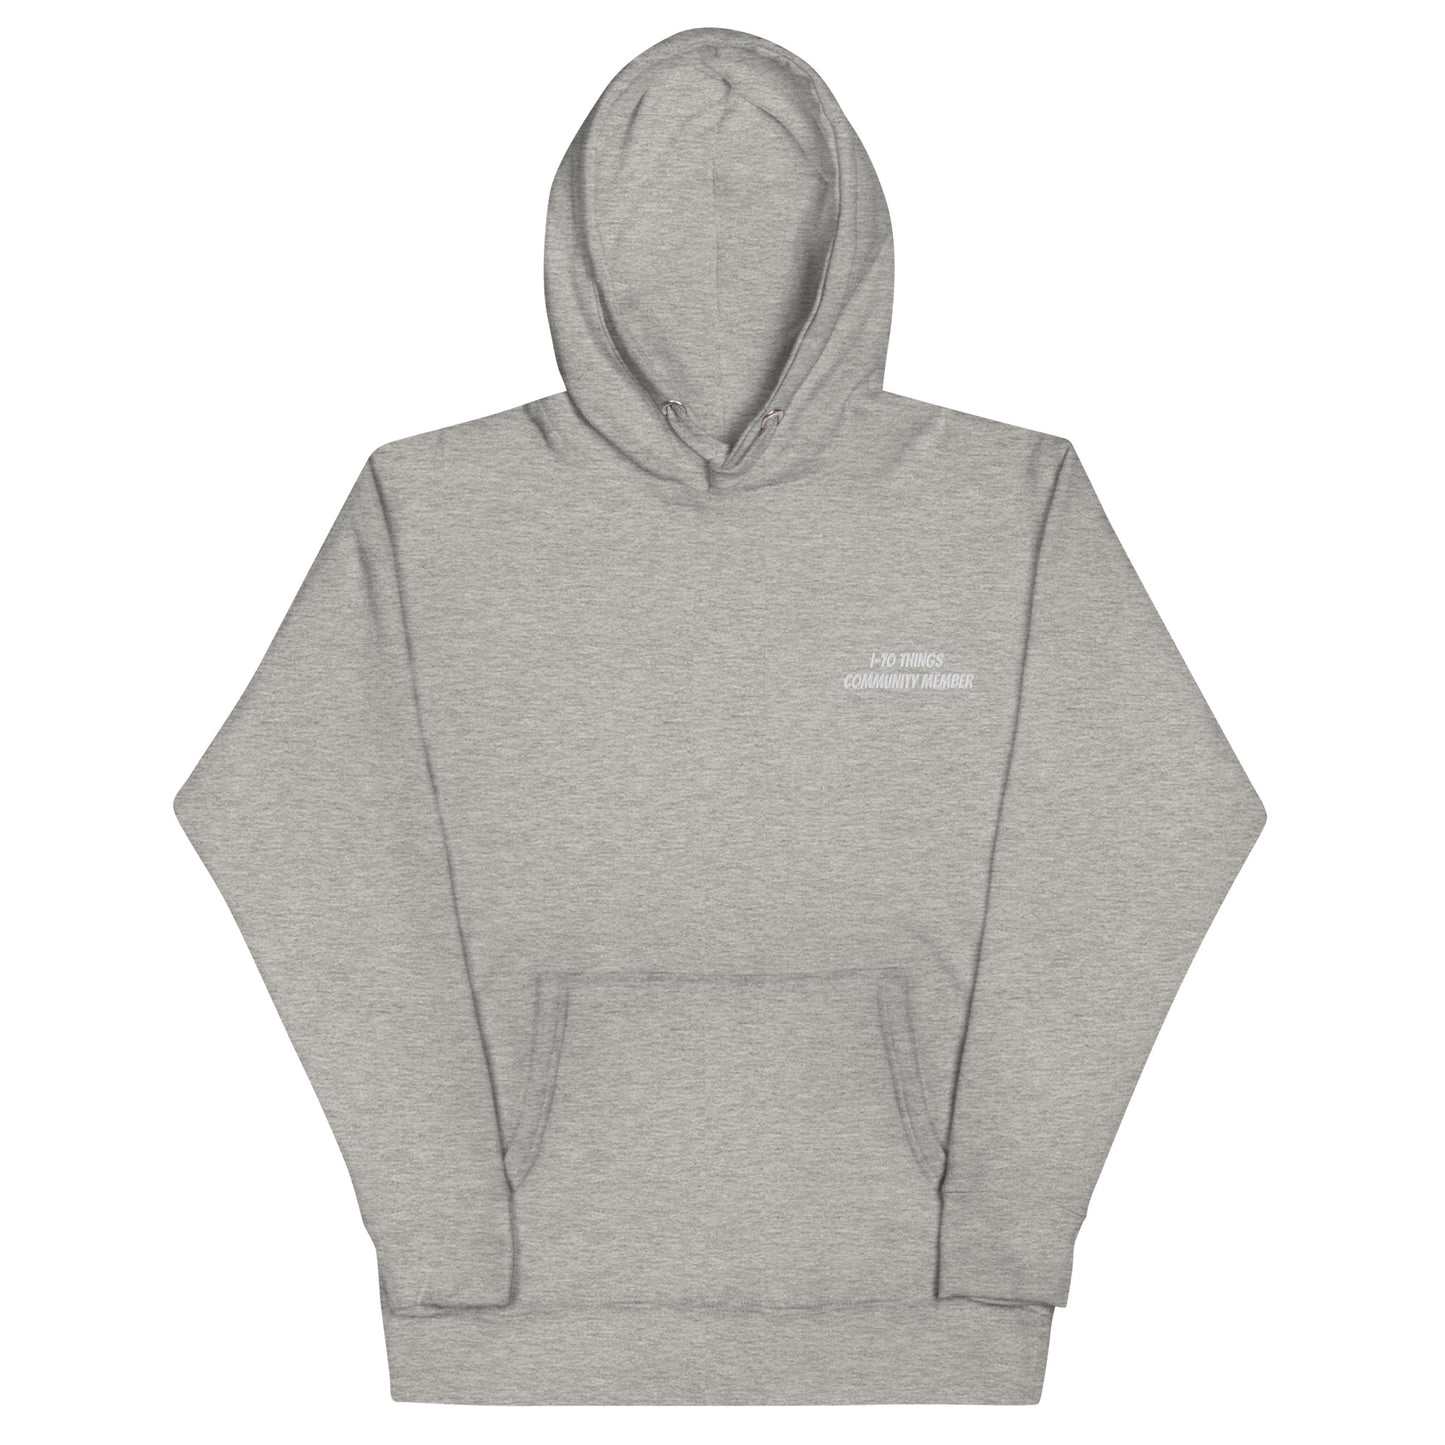 Embroidered Community Member Hoodie